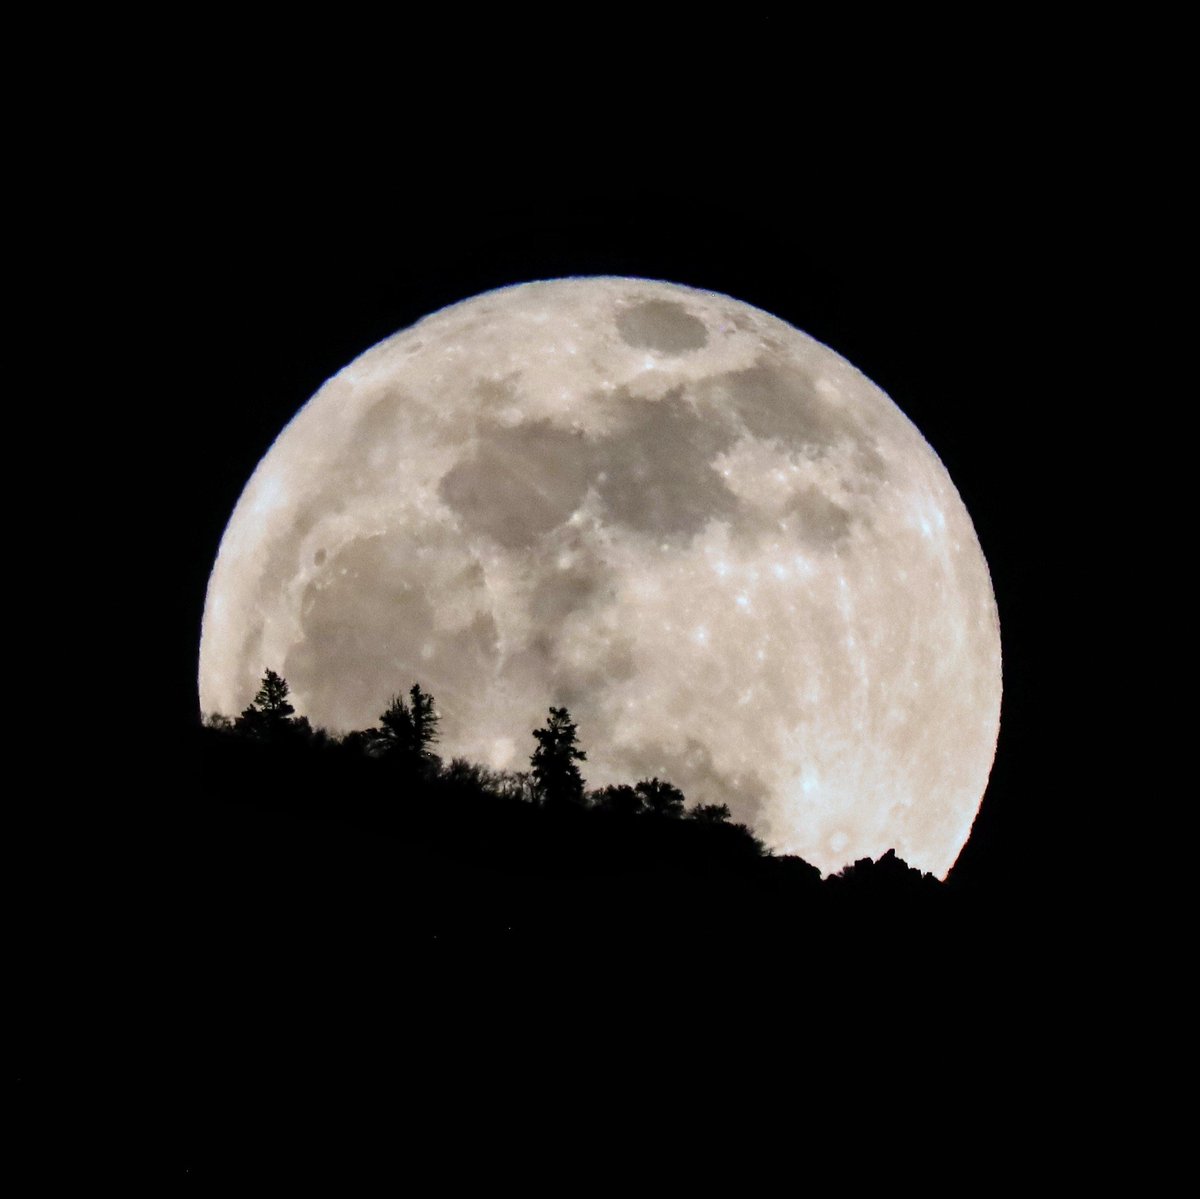 The Farmer's Almanac says the full moon in April is the pink moon. Well okay then. Here it is rising over Mount Olympus on April 23, 2024.
@KSLTV @fox13 @abc4utah @KUTV2news